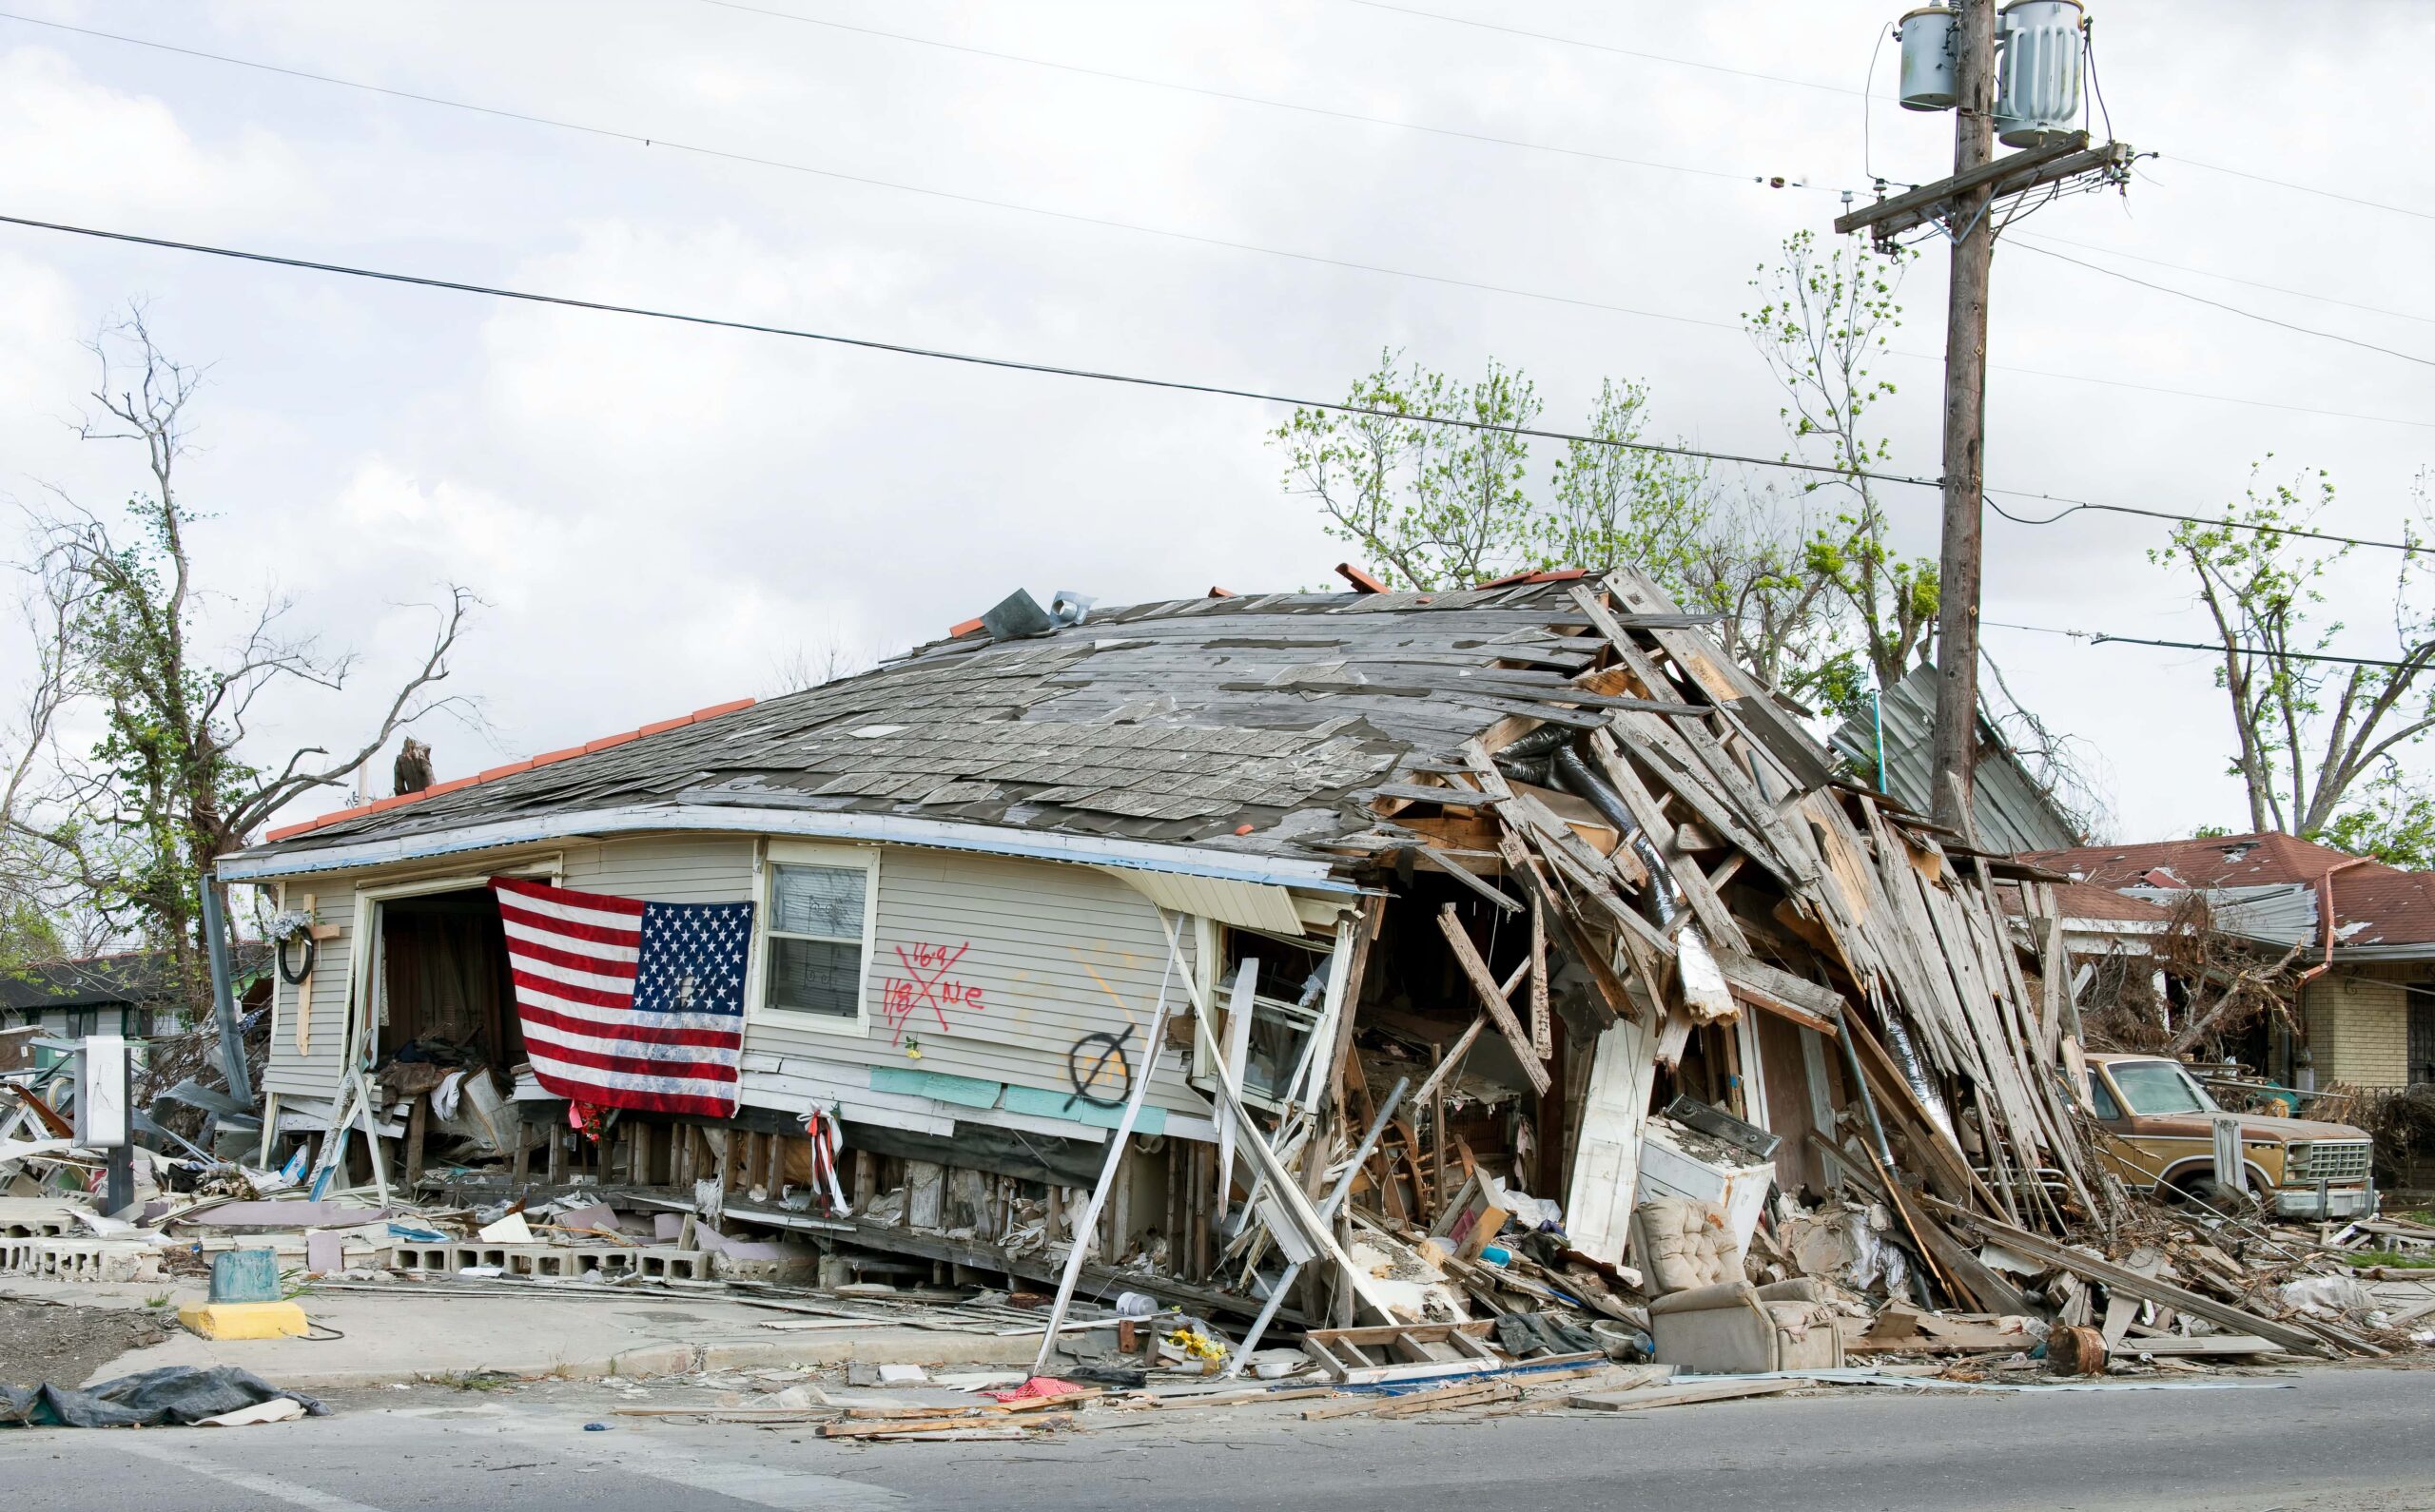 Affects of Katrina on New Orleans